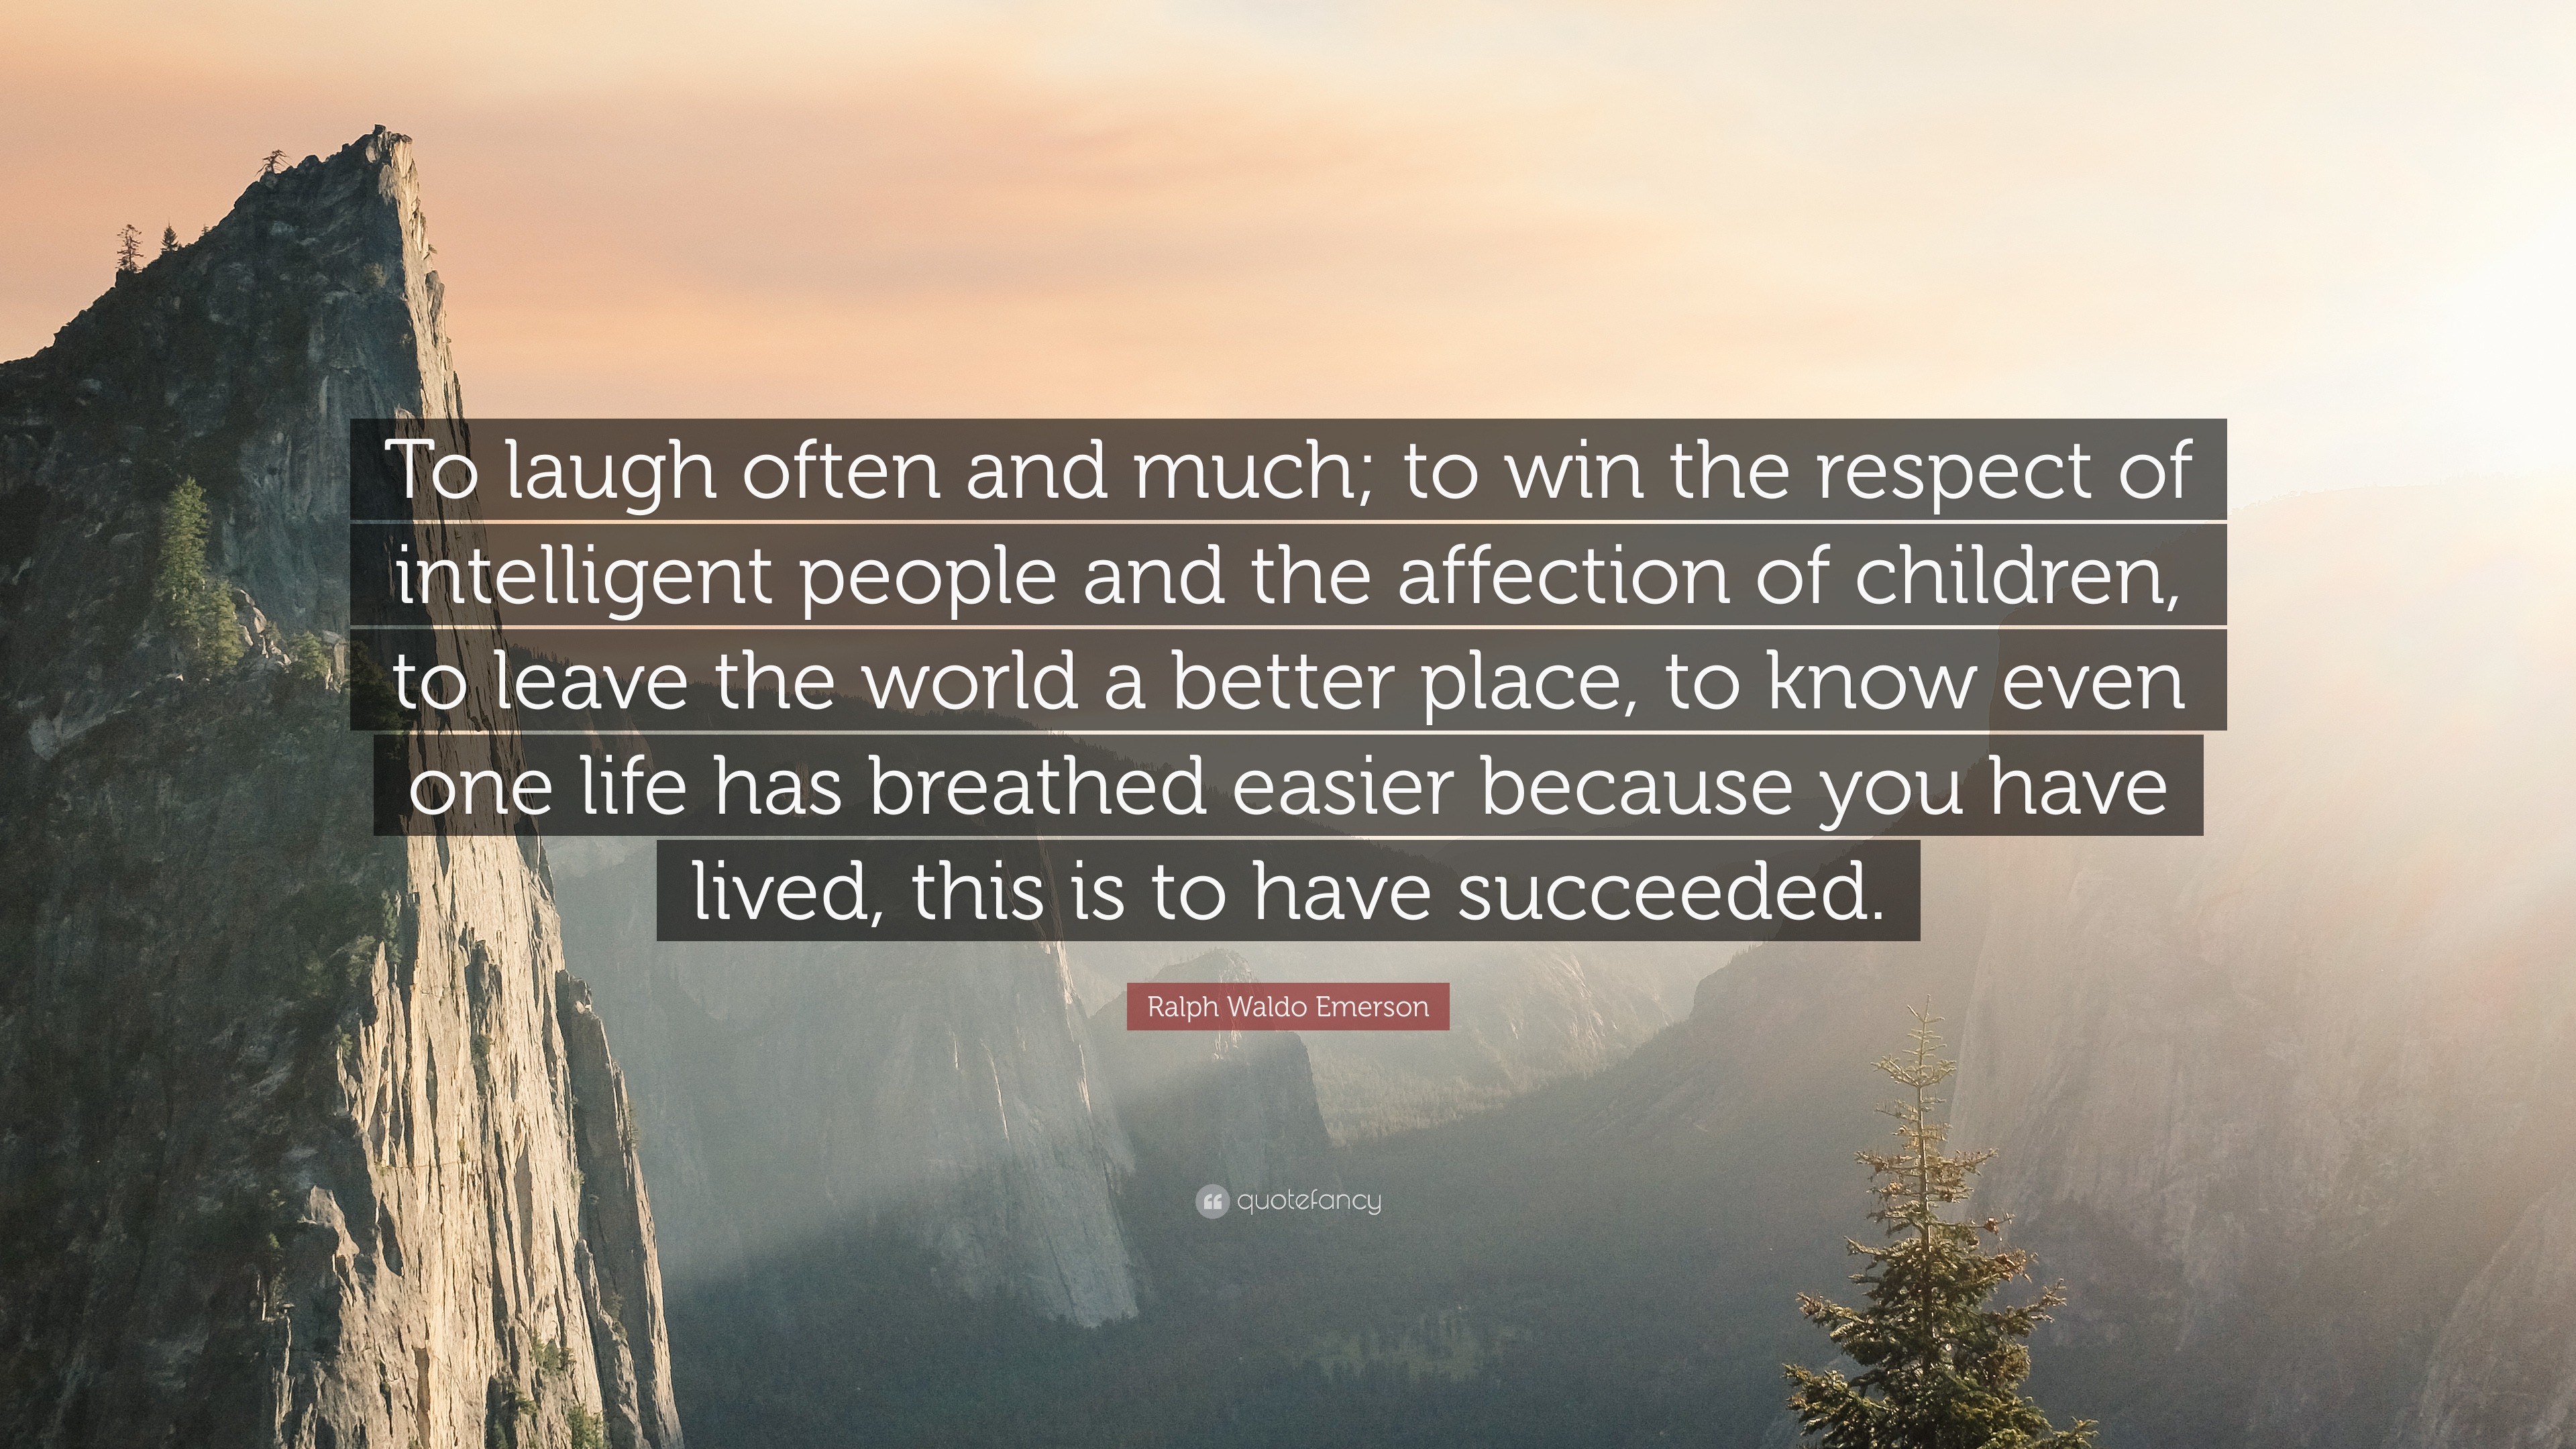 Ralph Waldo Emerson Quote: "To laugh often and much; to win the respect of intelligent people ...